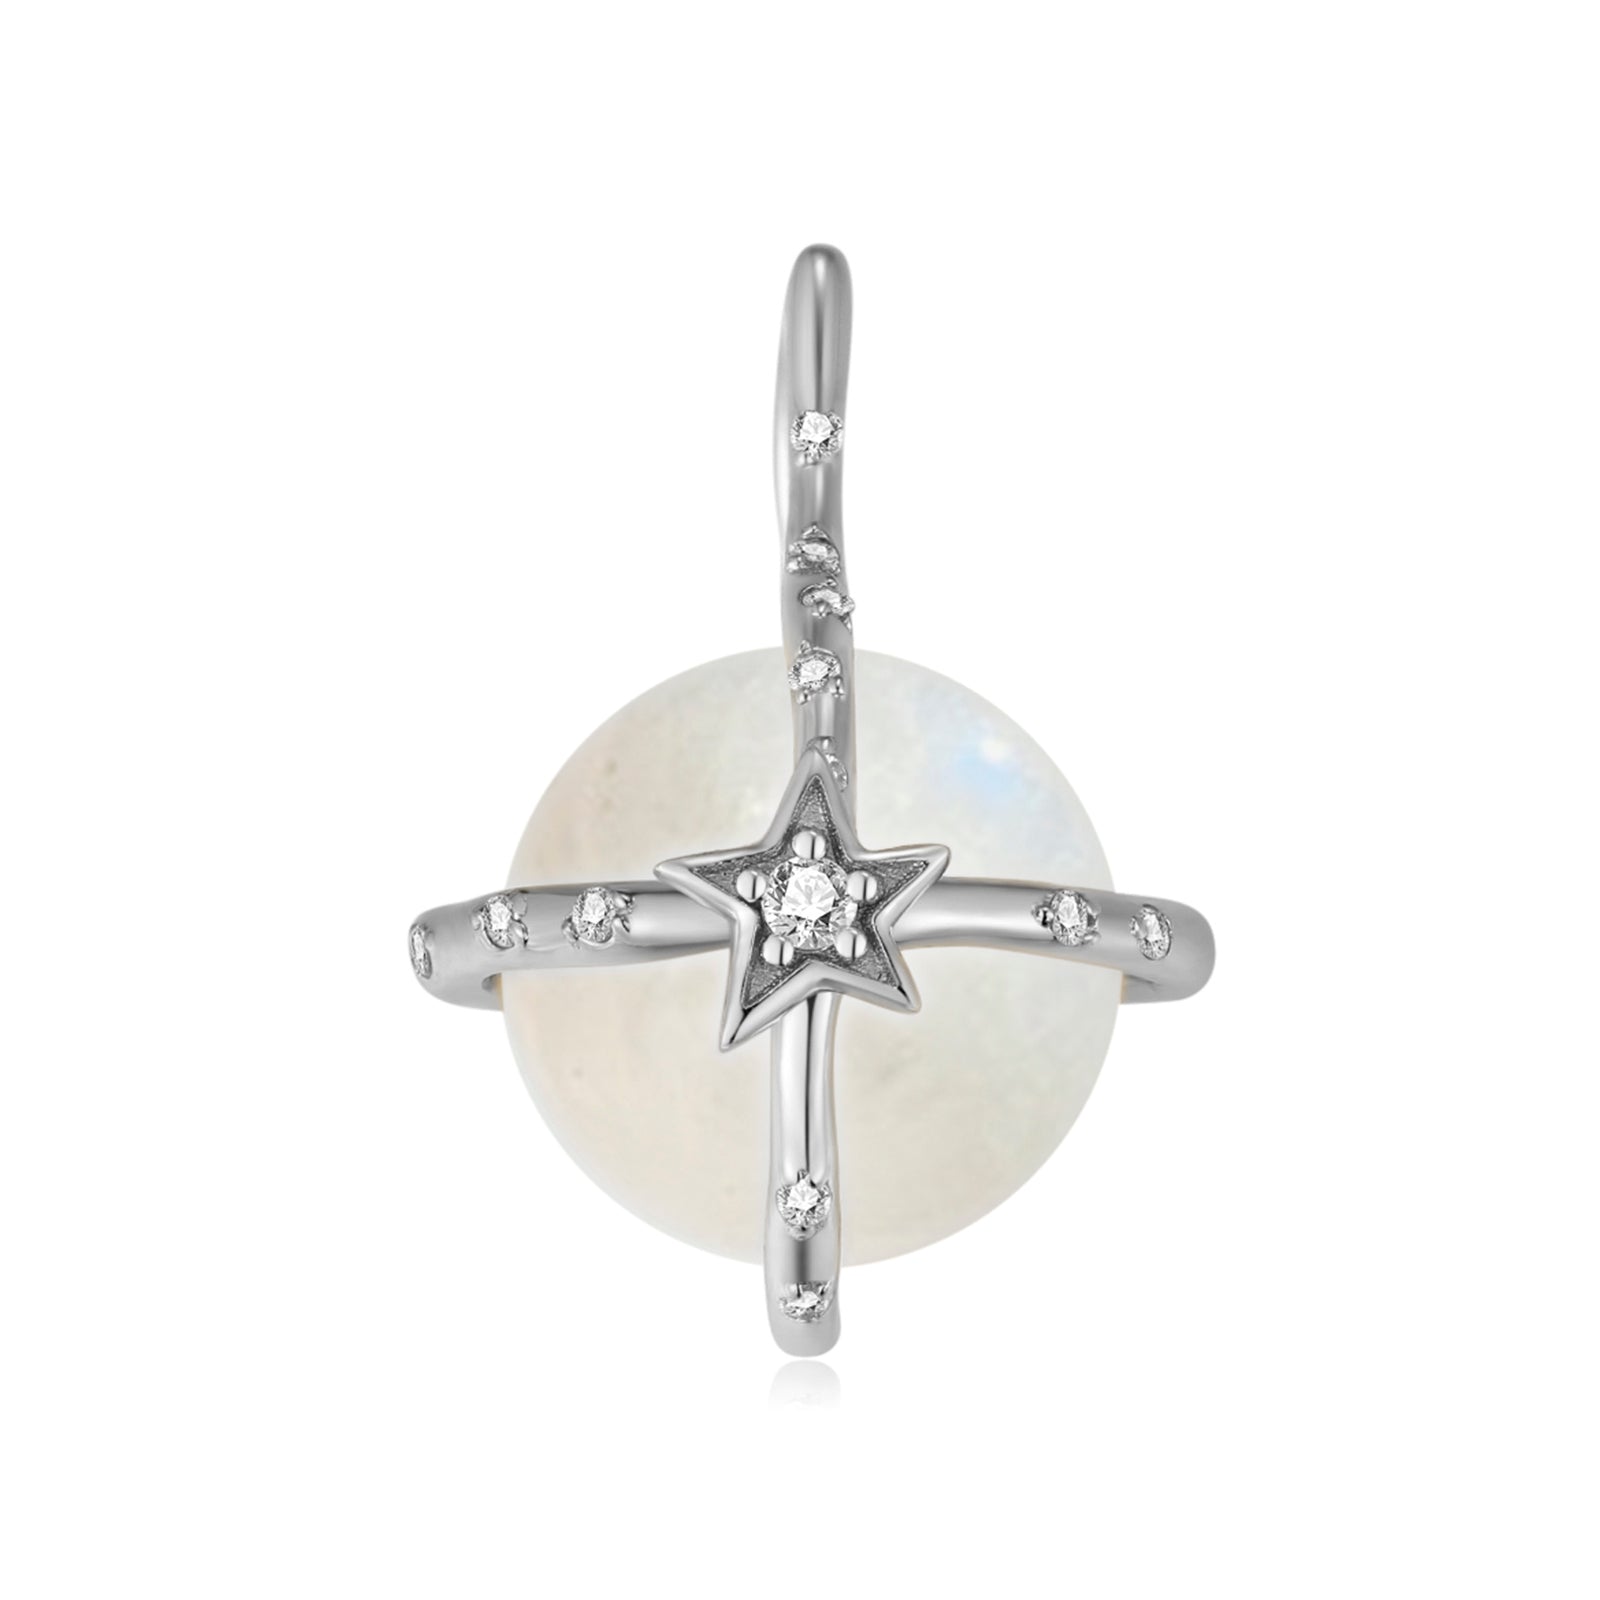 Moonstone Silver Orb Ball Pendant - B-612 | LOVE BY THE MOON